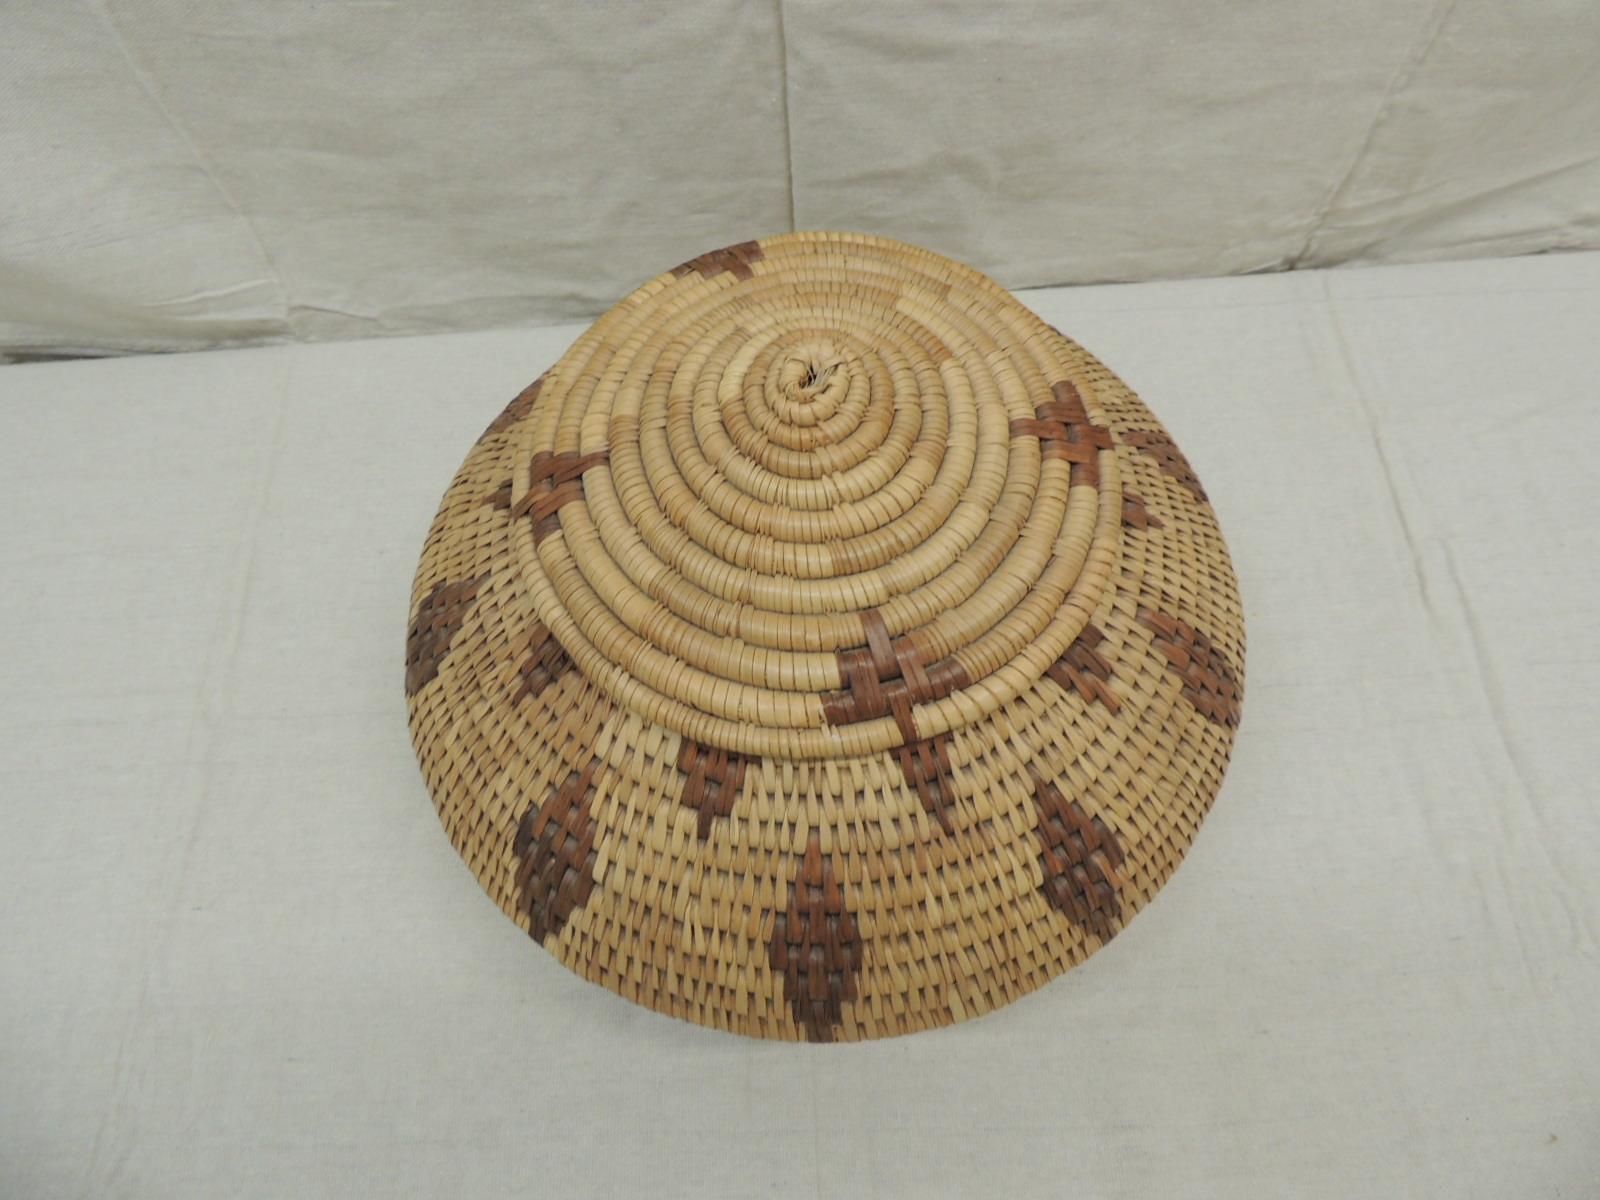 Vintage bulbous shape tribal pattern decorative basket with lid
Tan and brown woven fibers (rattan and sea grass)
Size: 13